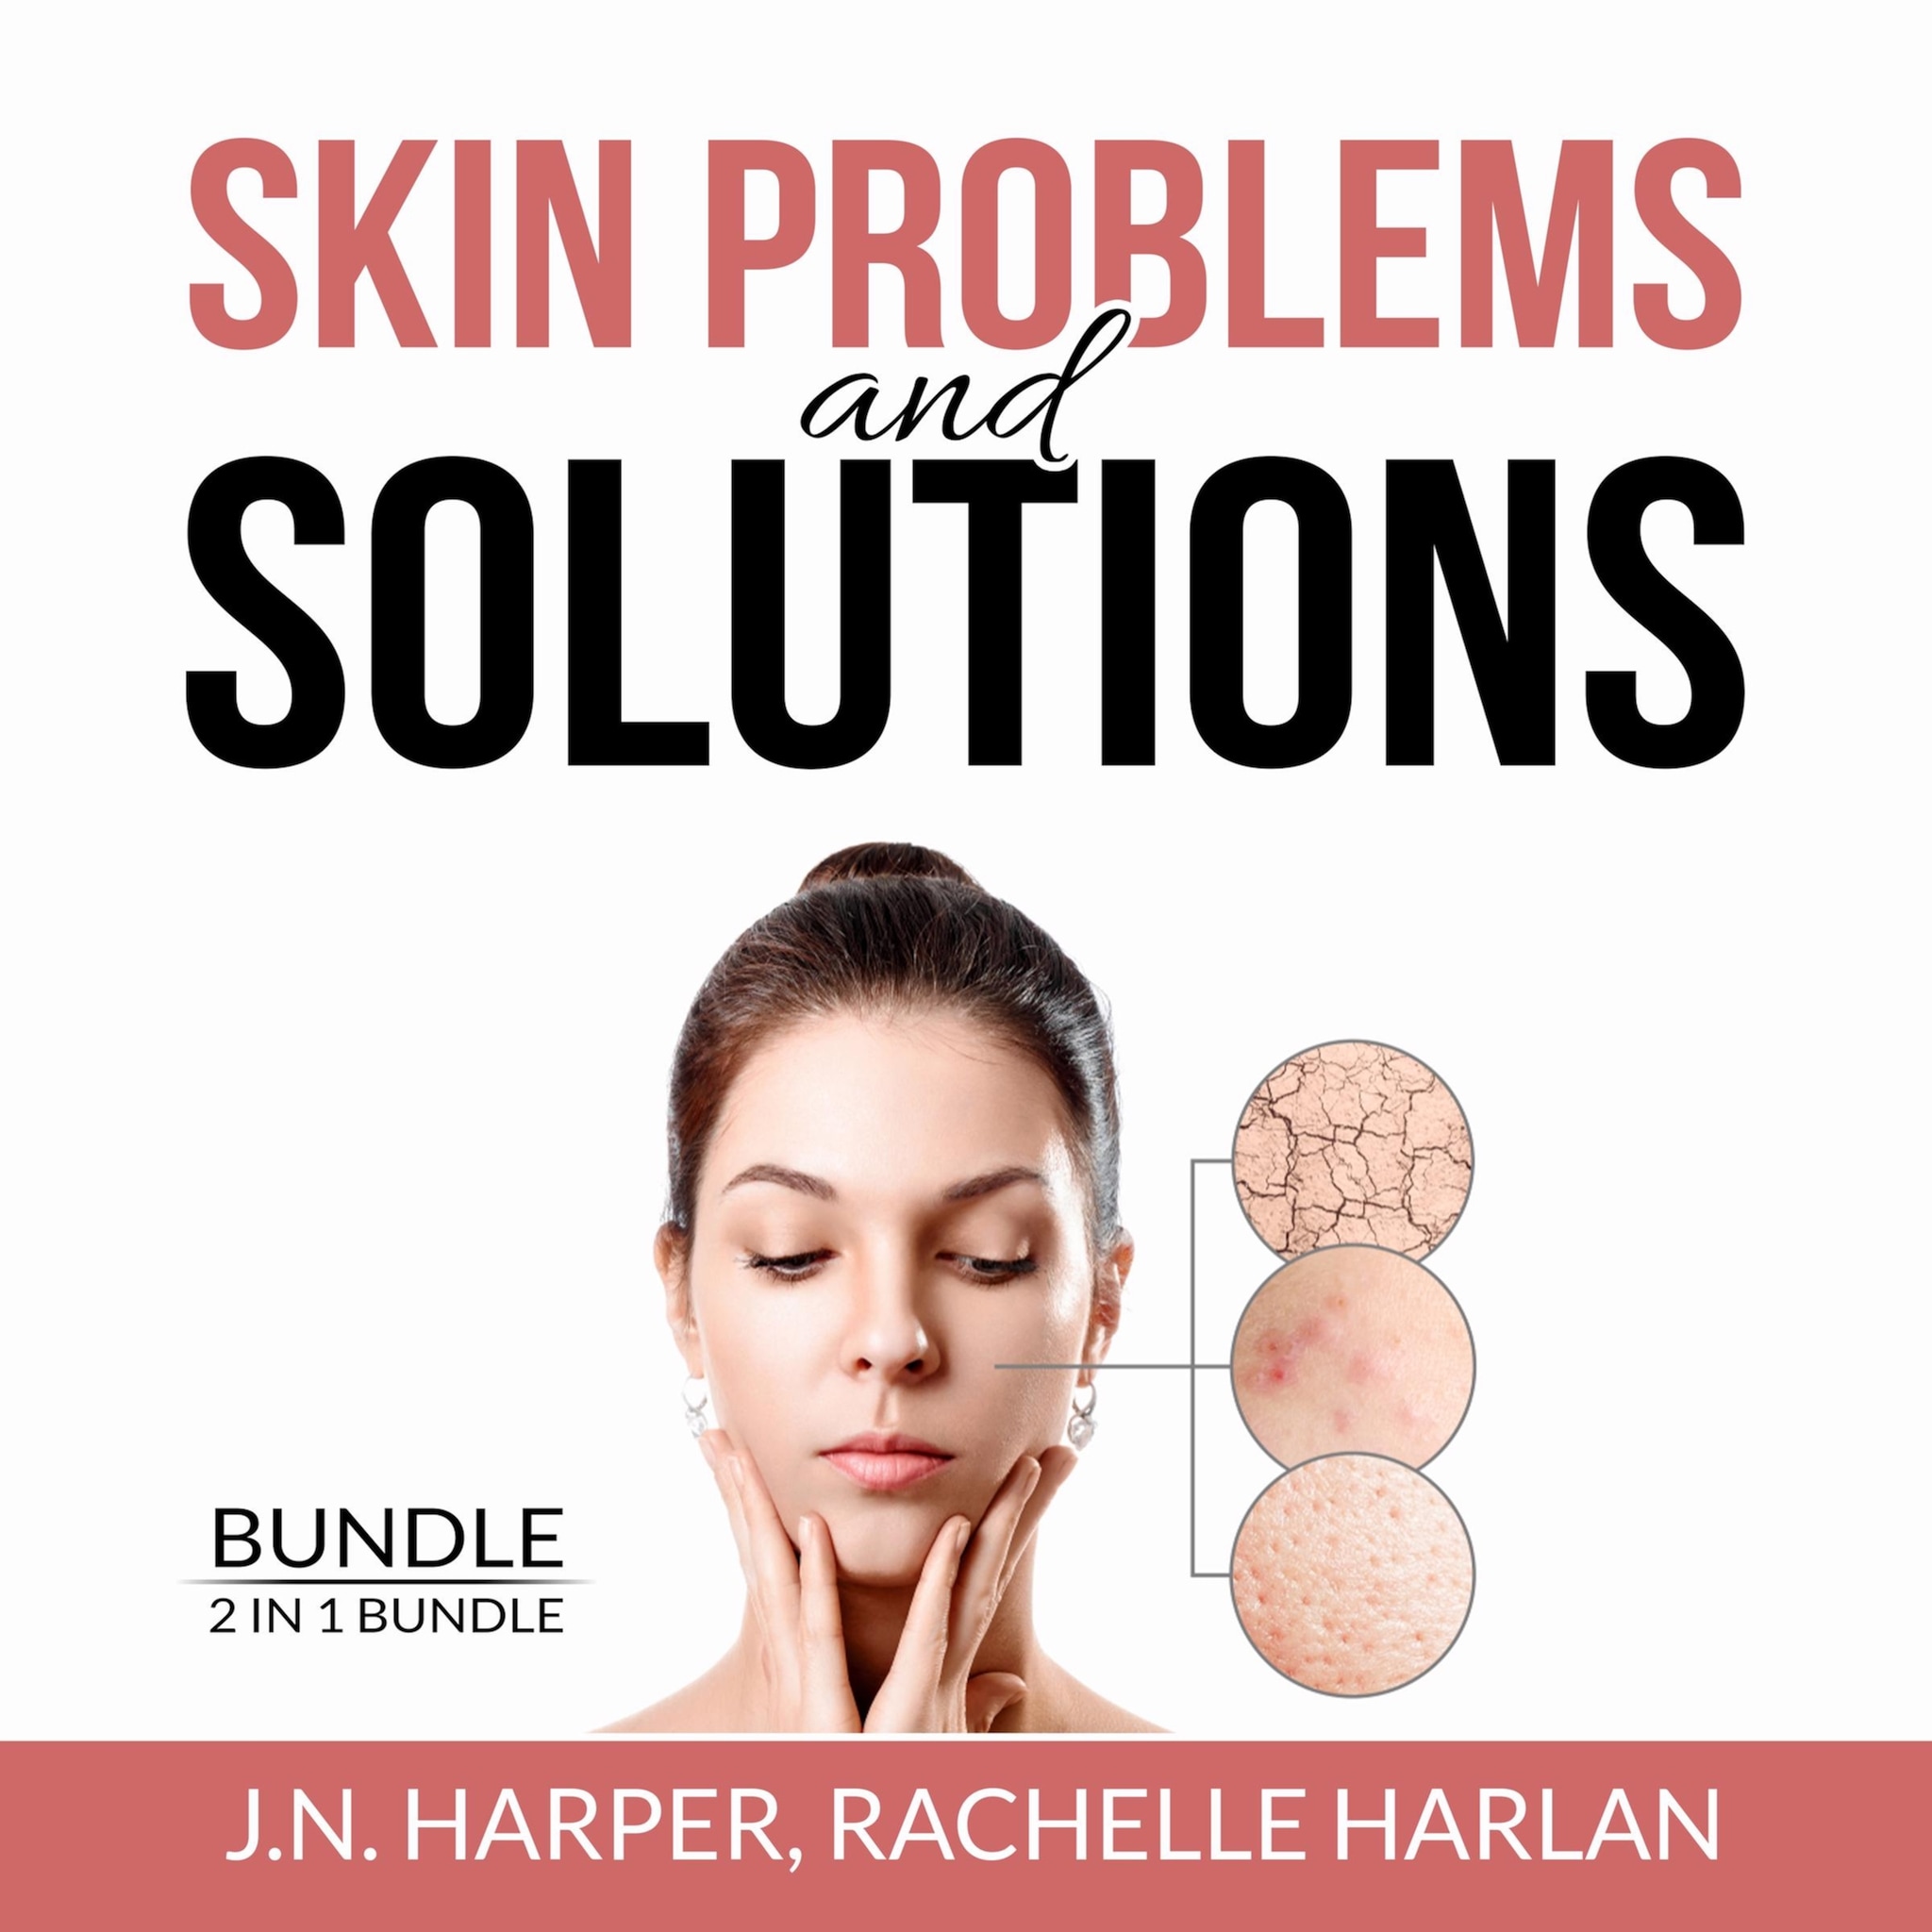 Skin Problems and Solutions Bundle: 2 in 1 Bundle, Eczema Detox and Healing Psoriasis ilmaiseksi